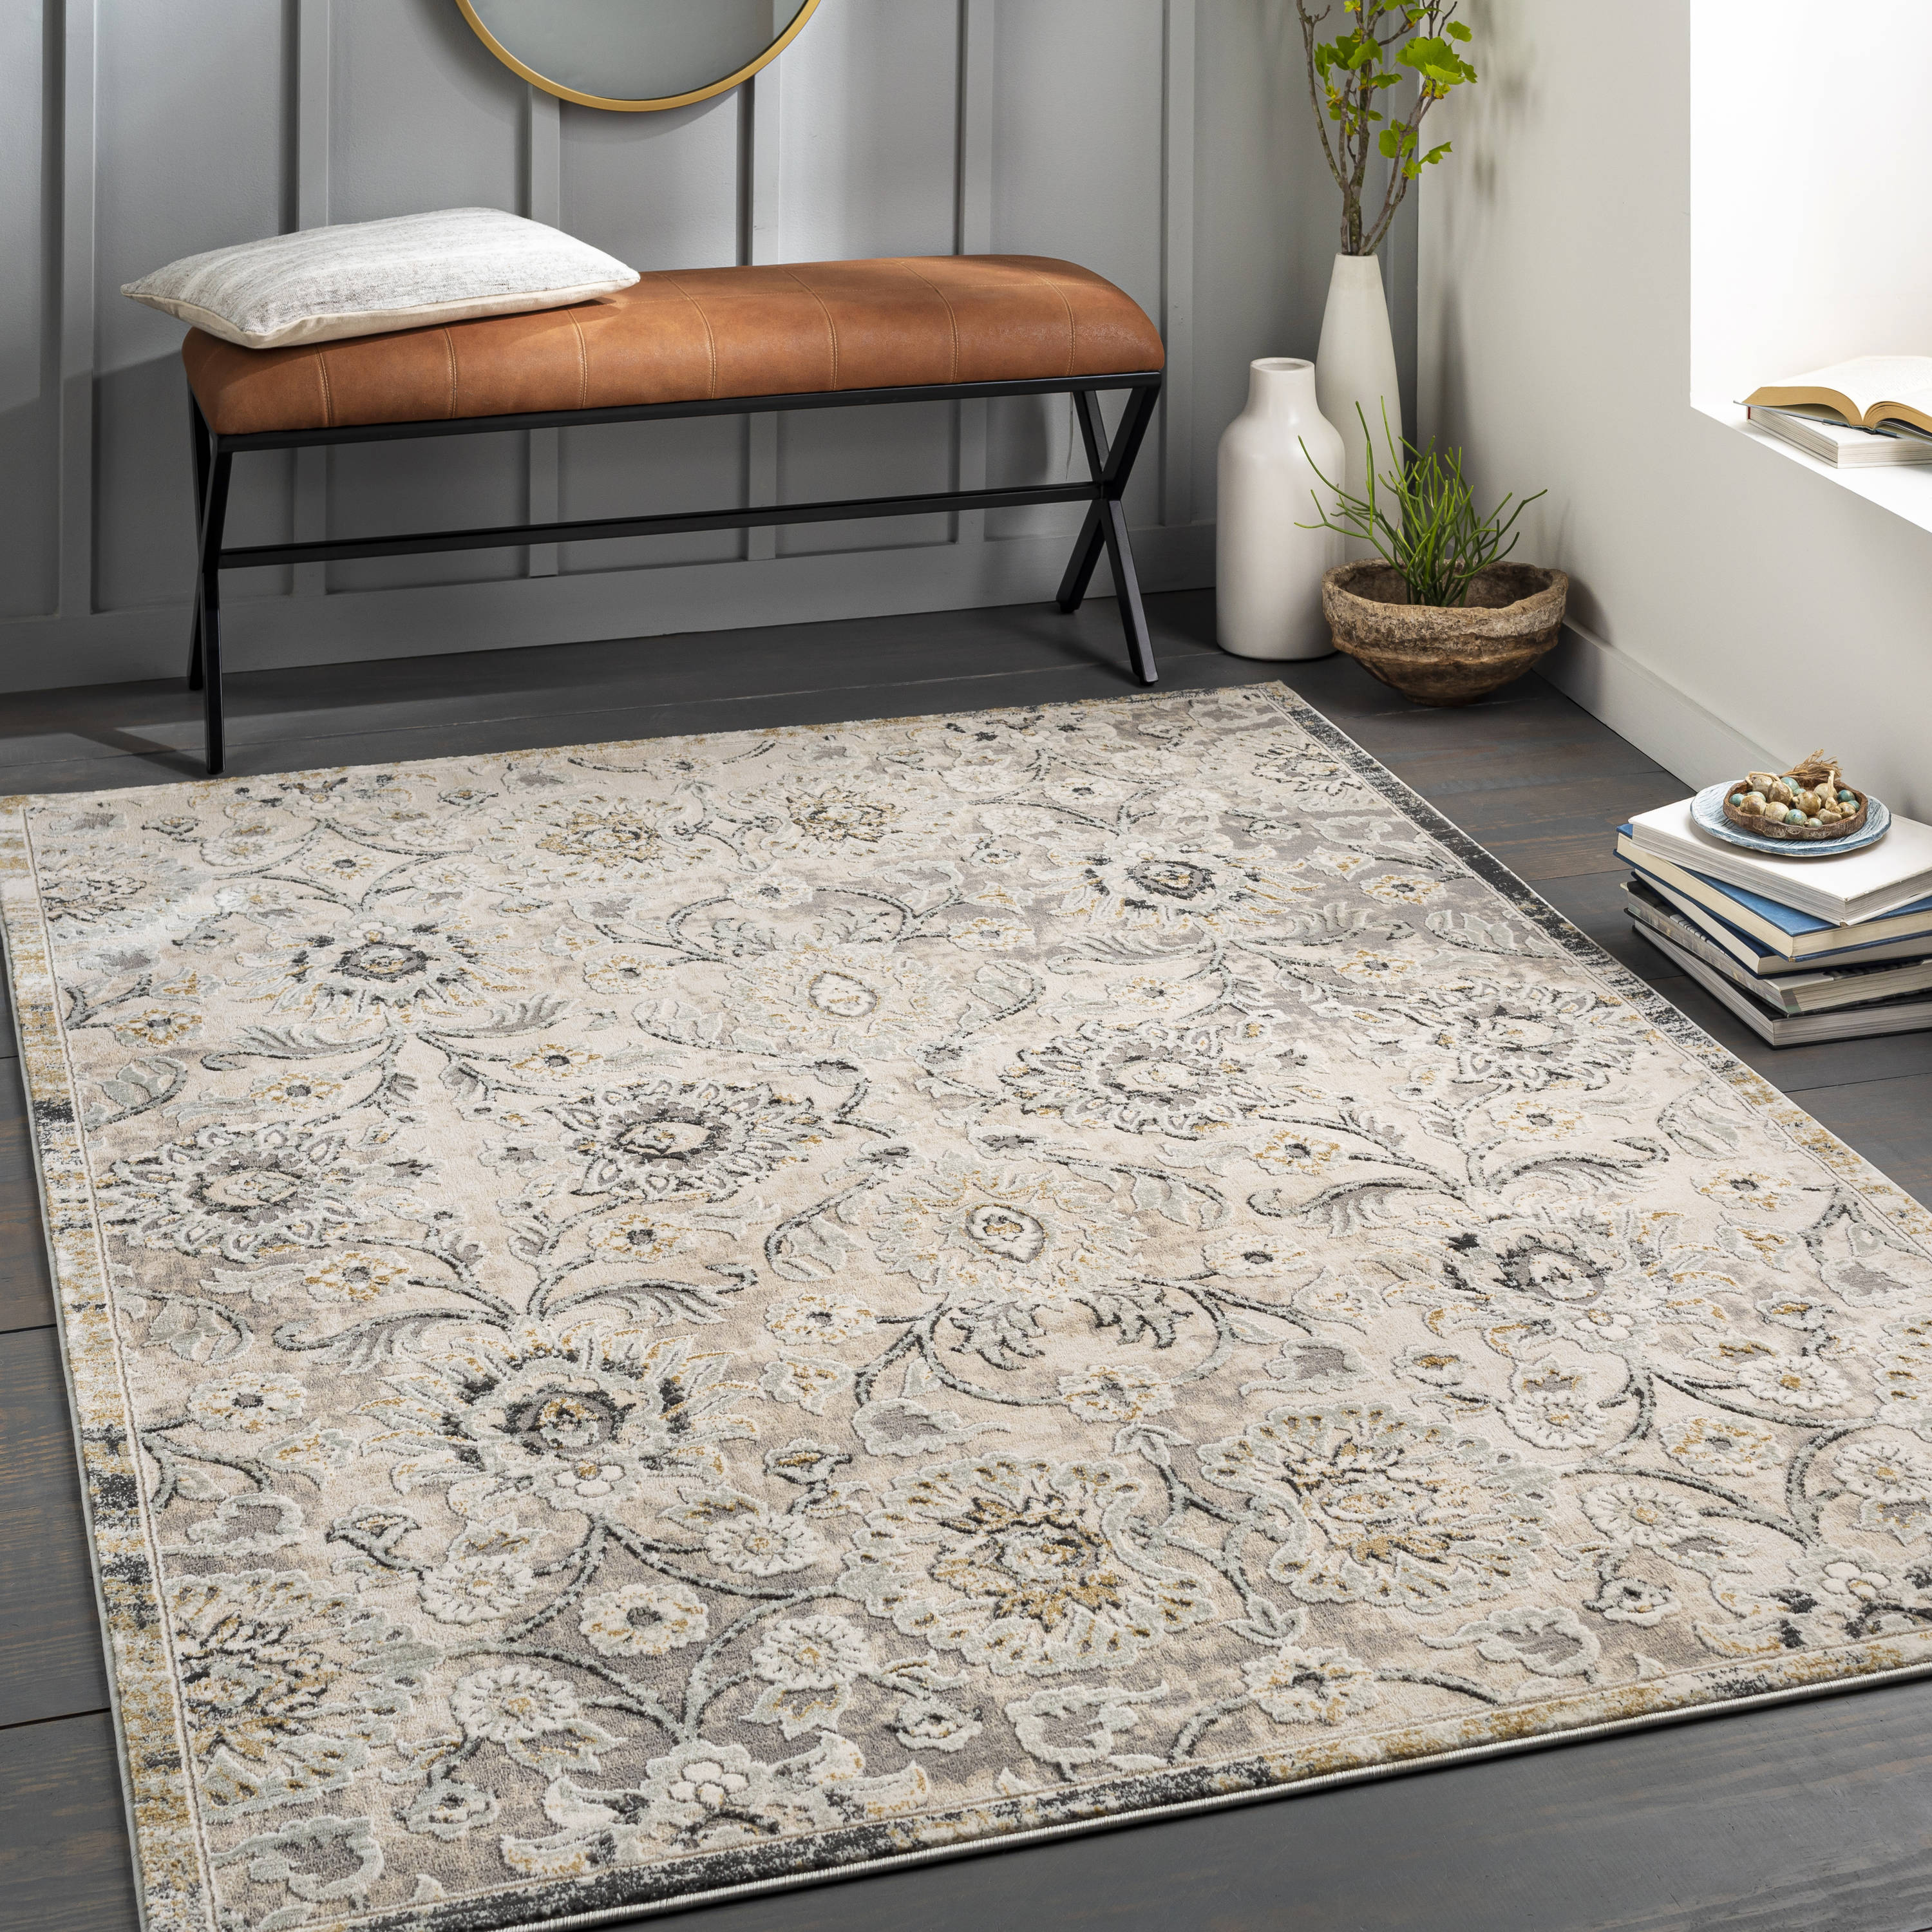 Game-Changing Tips To Keep Your Rugs Pristine